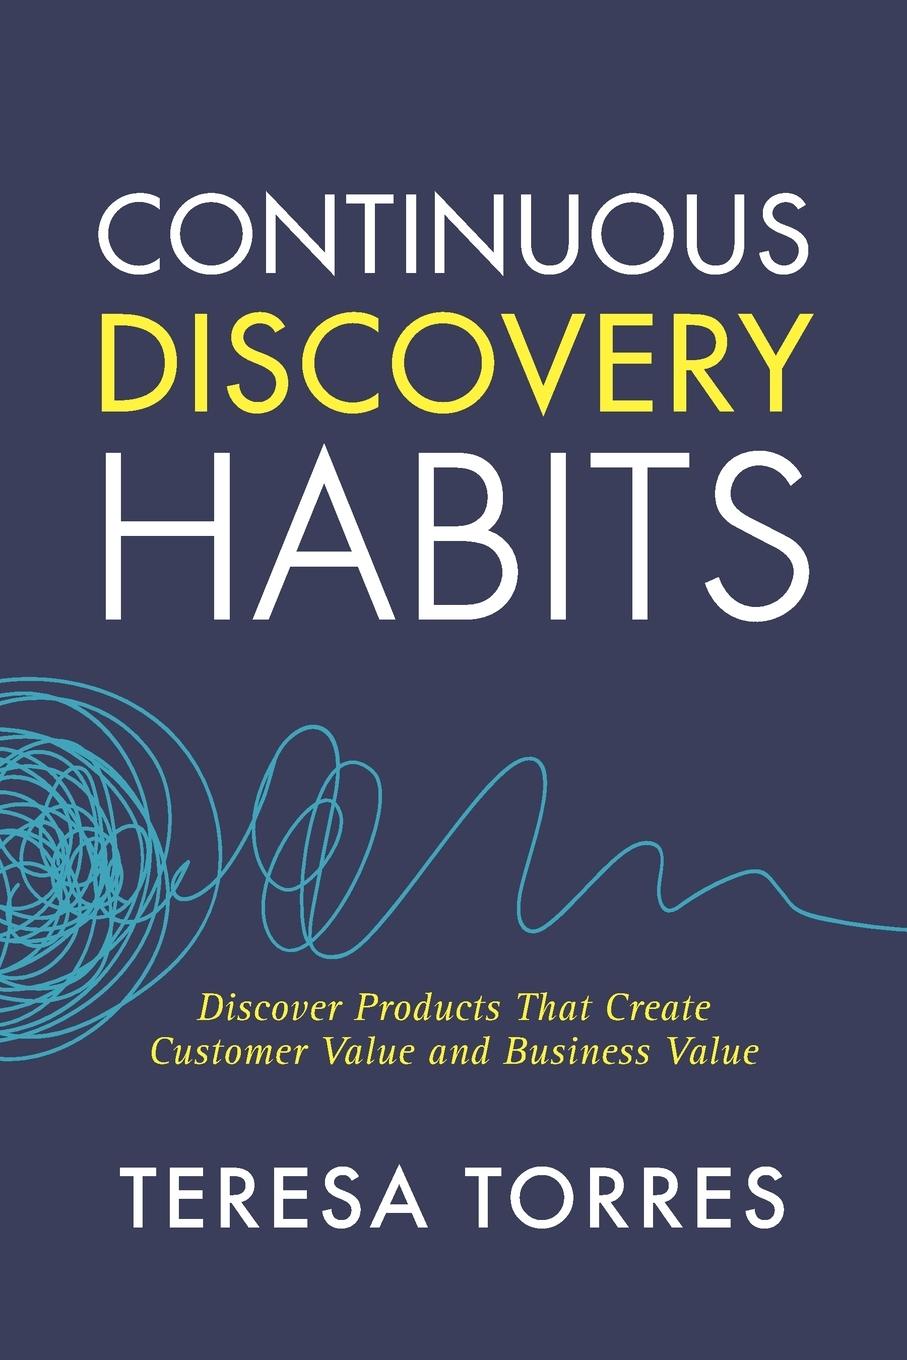 Book Continuous Discovery Habits Teresa Torres